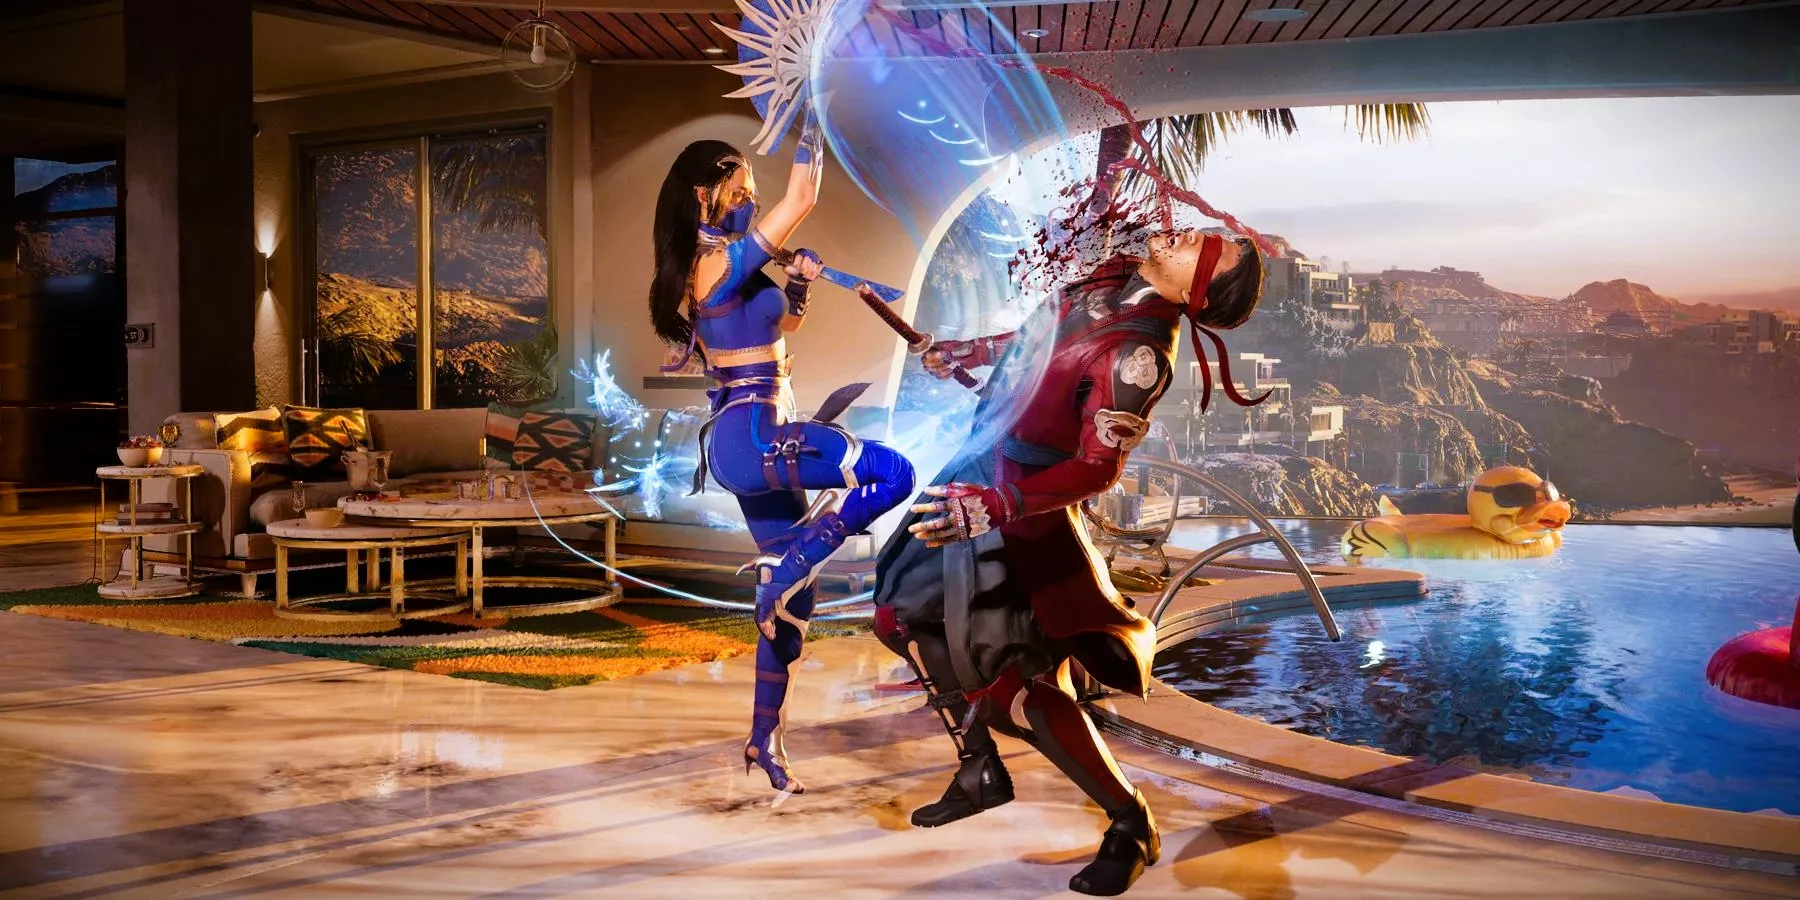 Confirmed Roster for Mortal Kombat 1: Meet All the Characters!